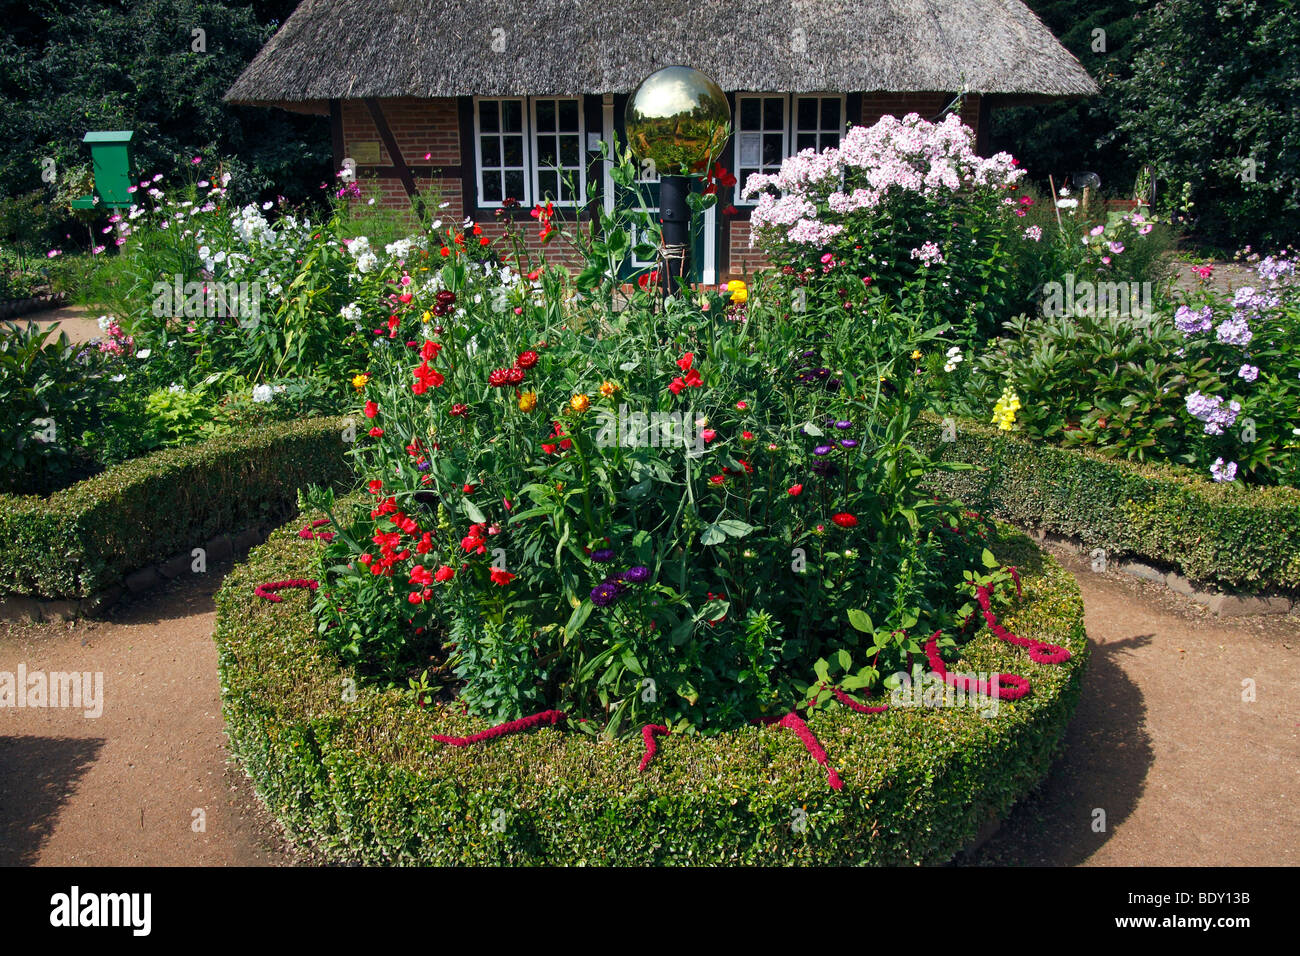 Low German cottage garden with a rondel, box hedge, Garden phlox (Phlox paniculata) and other summer flowers, Botanical Garden  Stock Photo